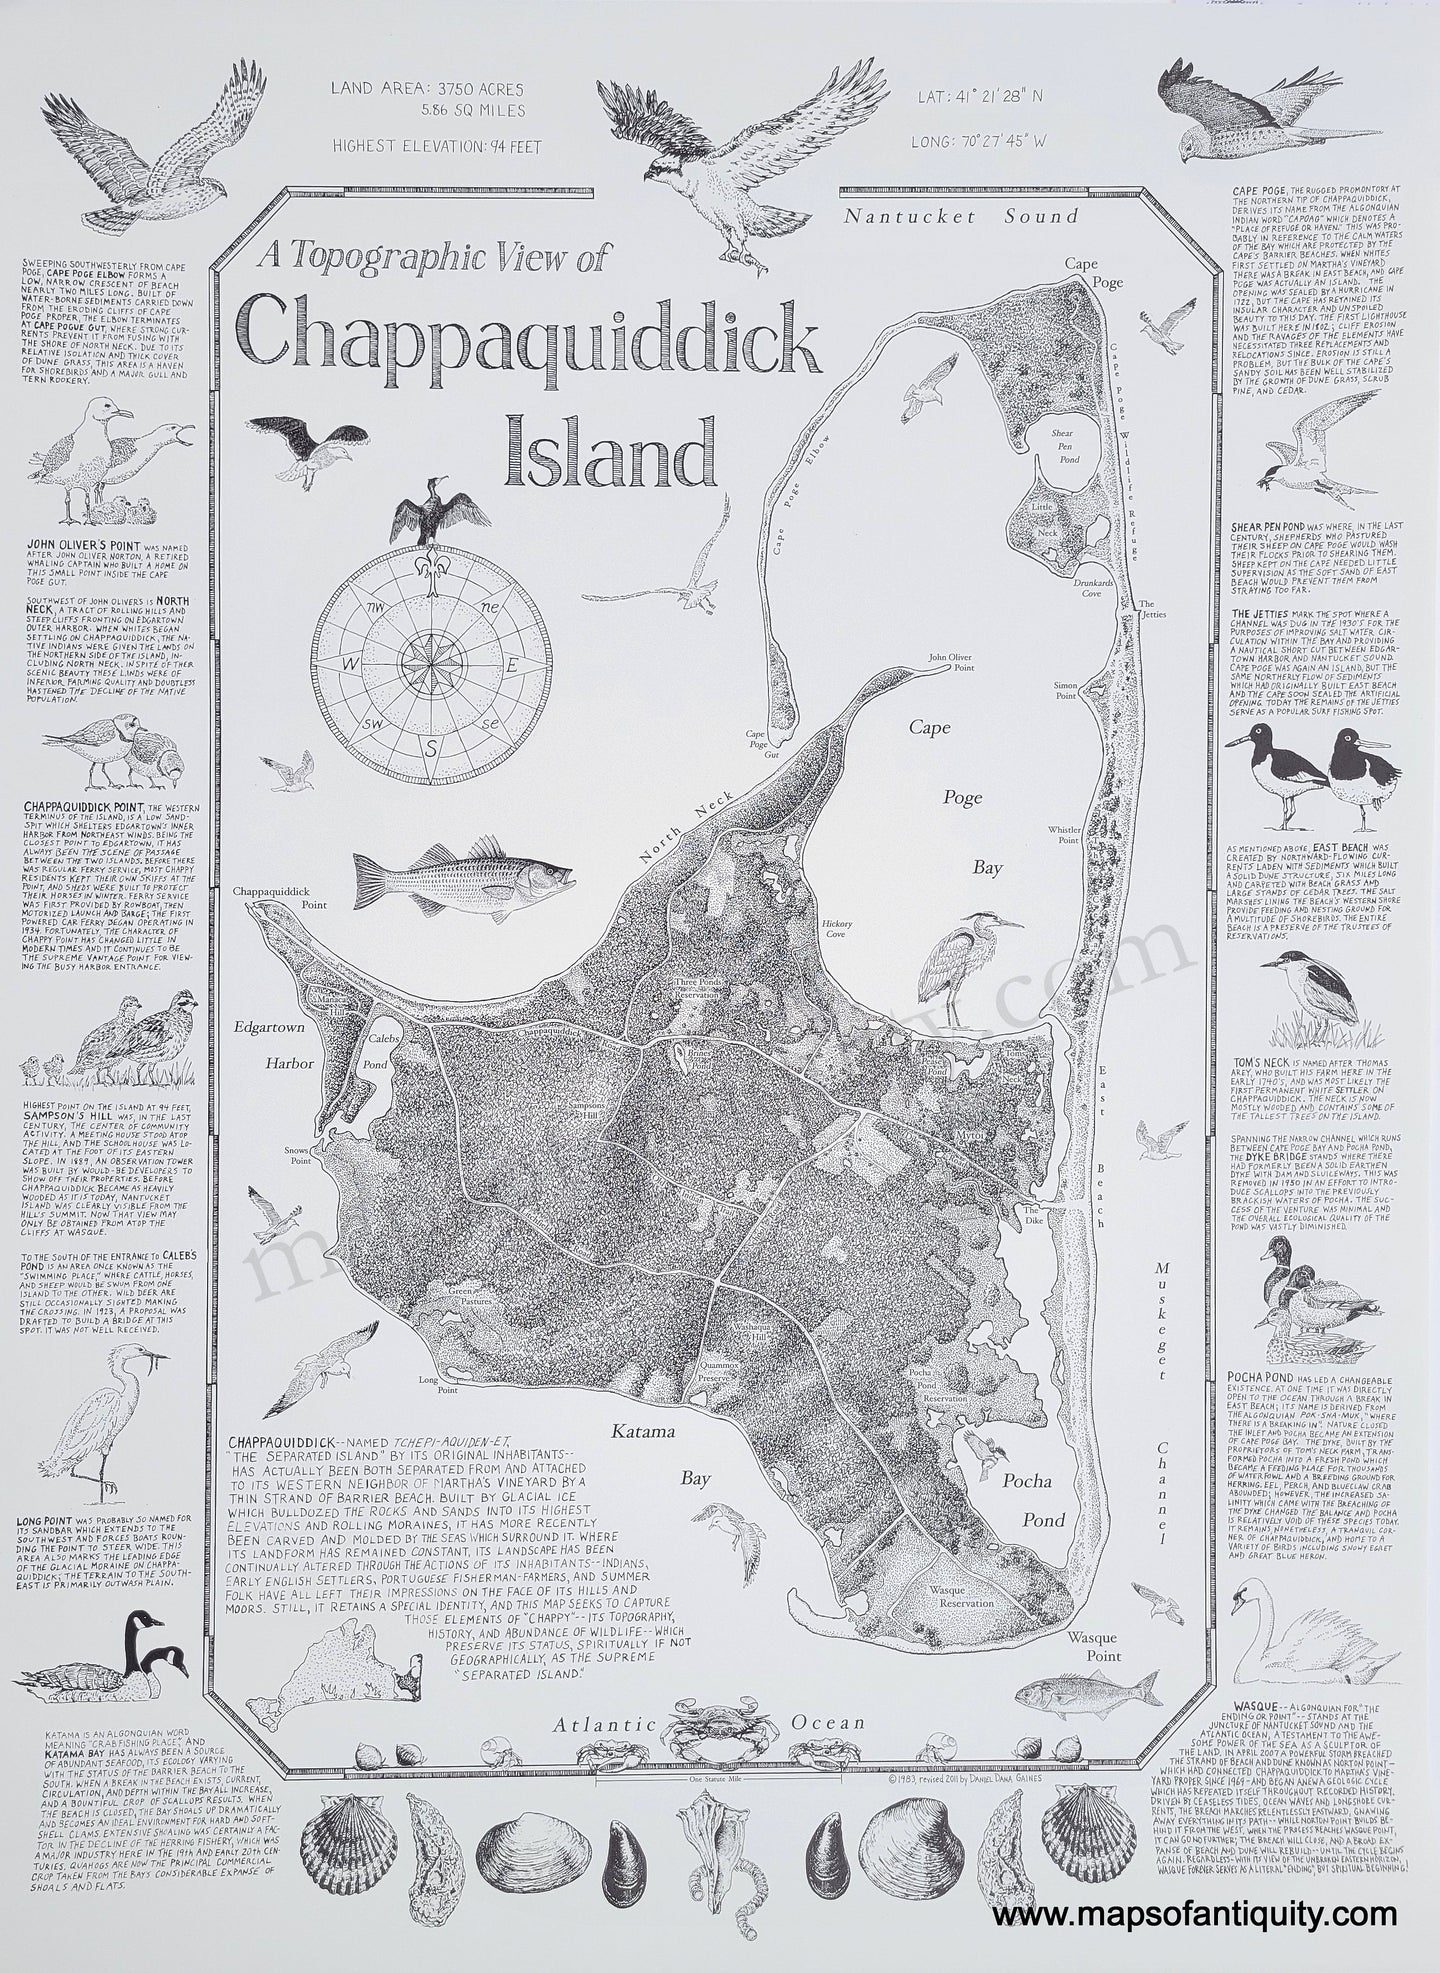 Graphic Map of Chappaquiddick Island, part of Martha's Vineyard. Black and white with decorative compass, border decorated with local birds and shellfish, text relating to notable sites and local specialties.